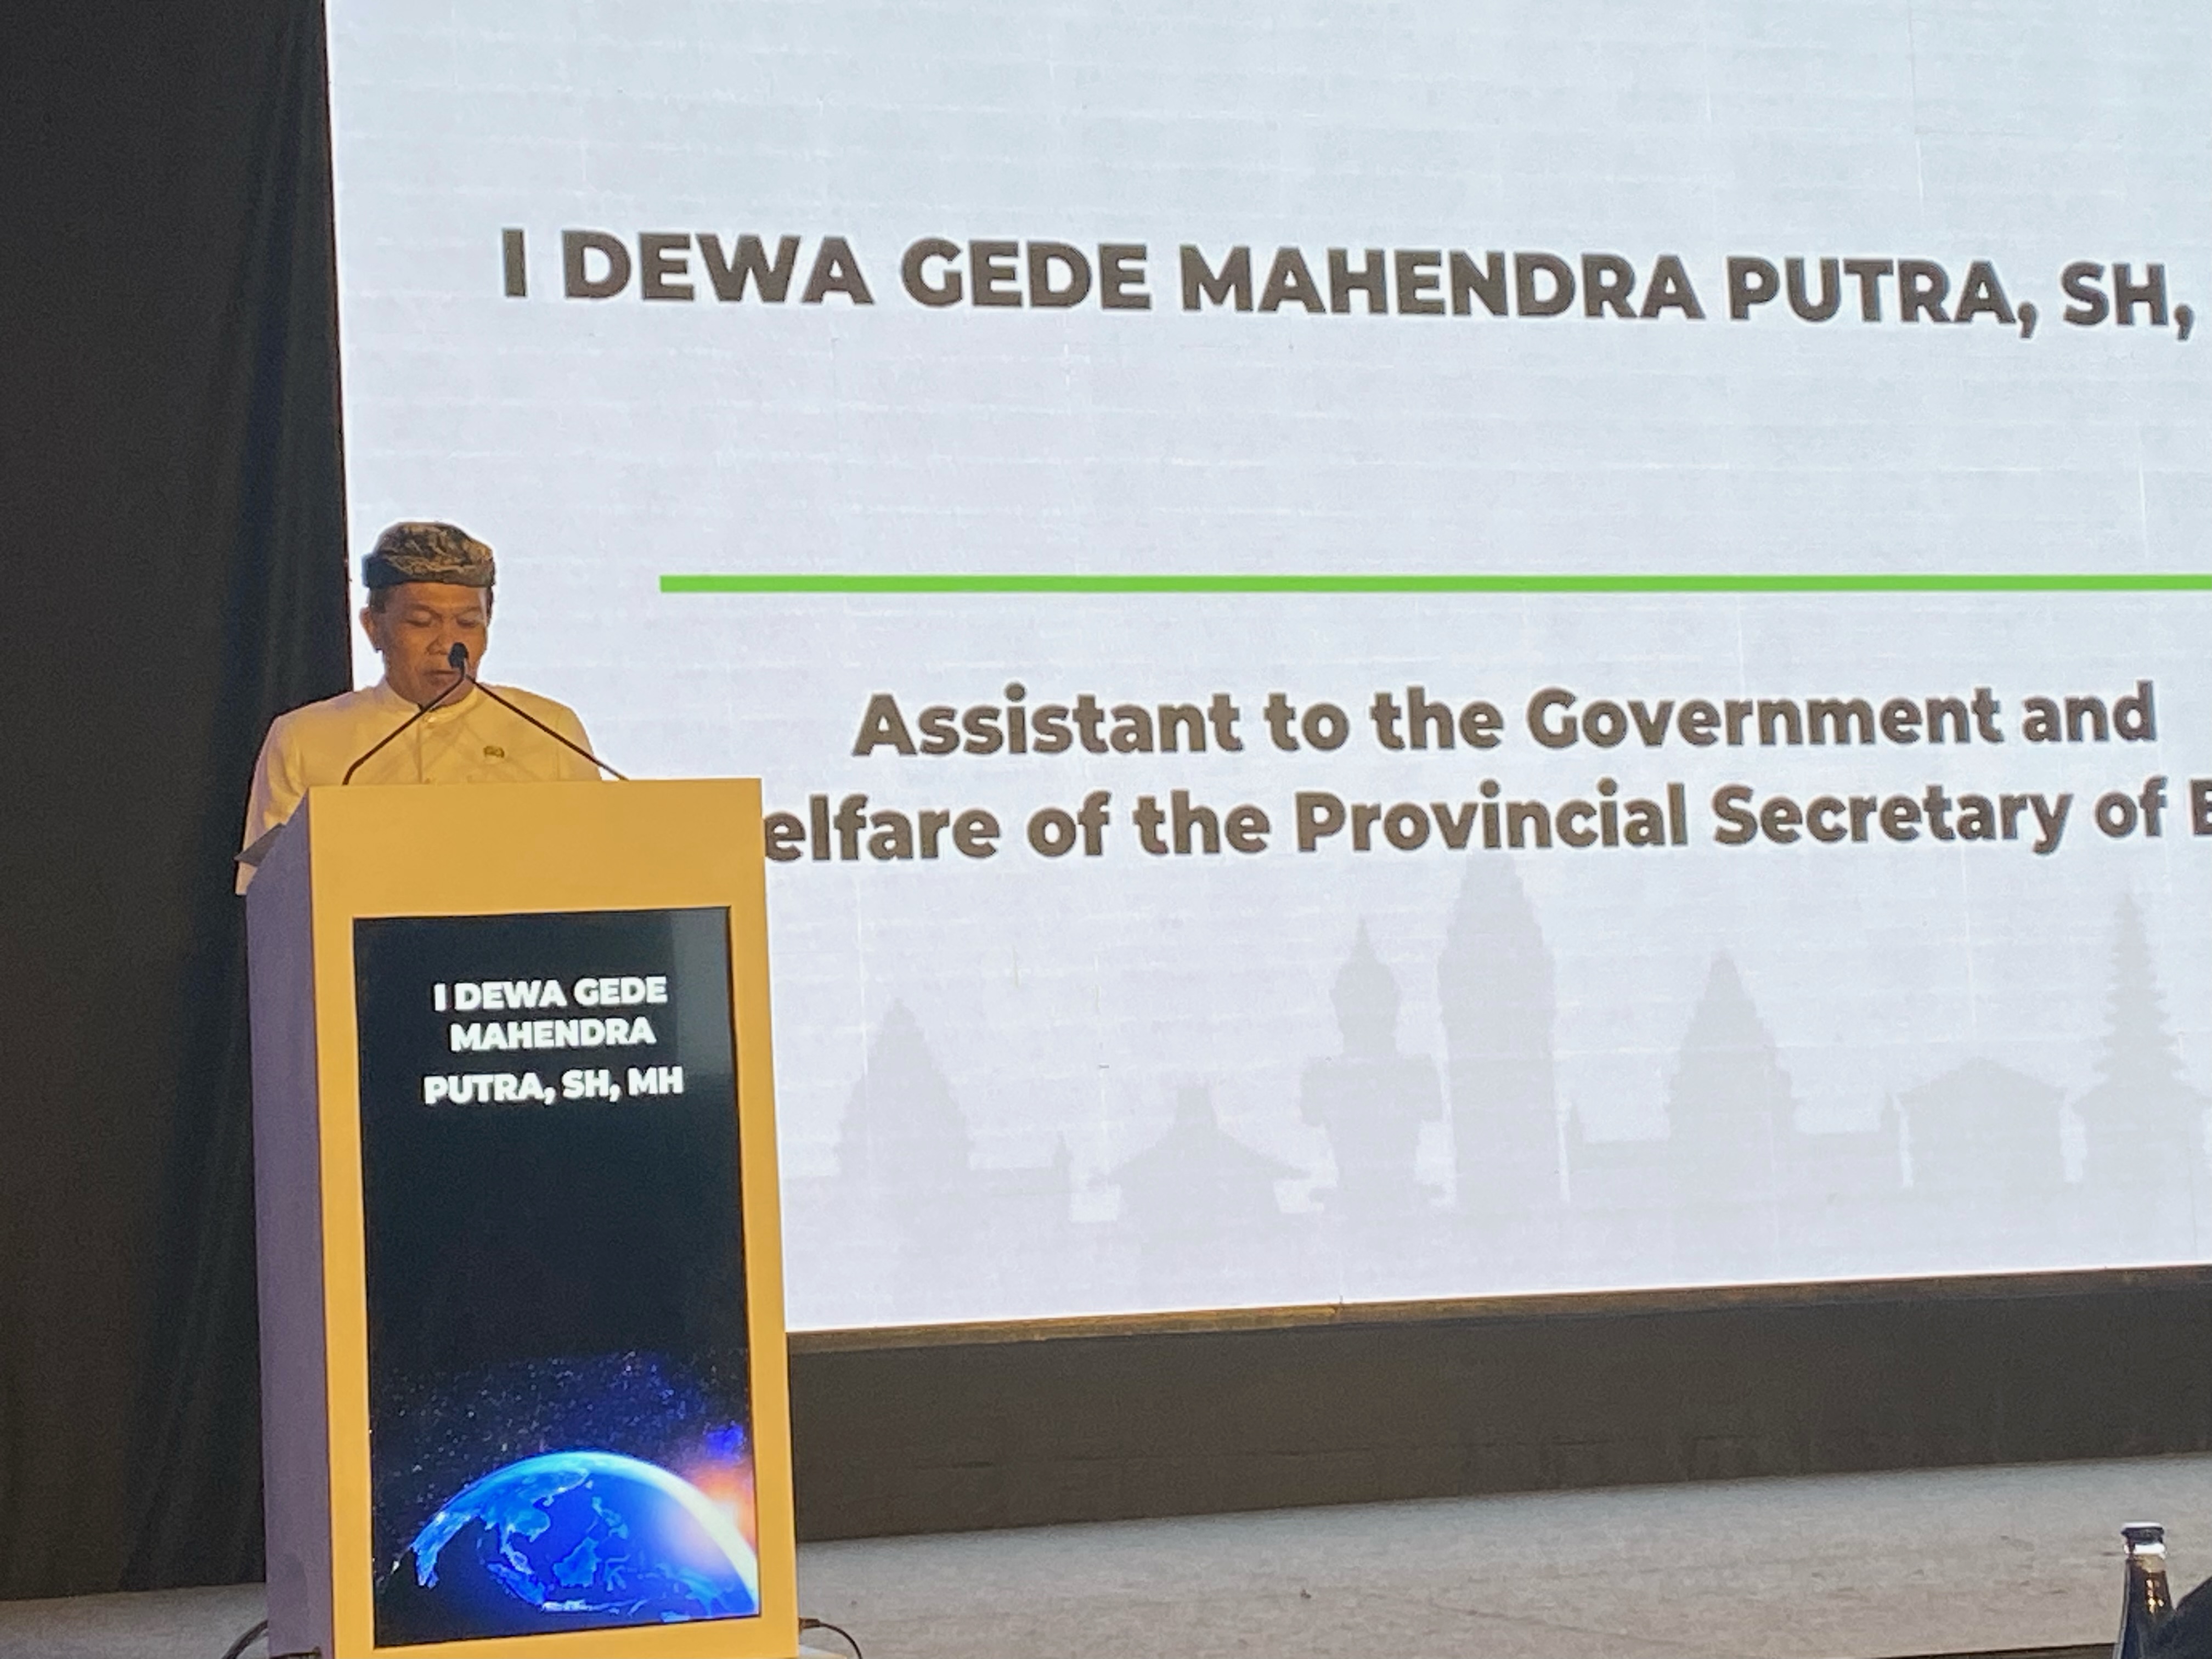 Dewa Gede Mahendra Putra, SH, MH, Assistant to the Government and Welfare of the Provincial Secretary of Bali 